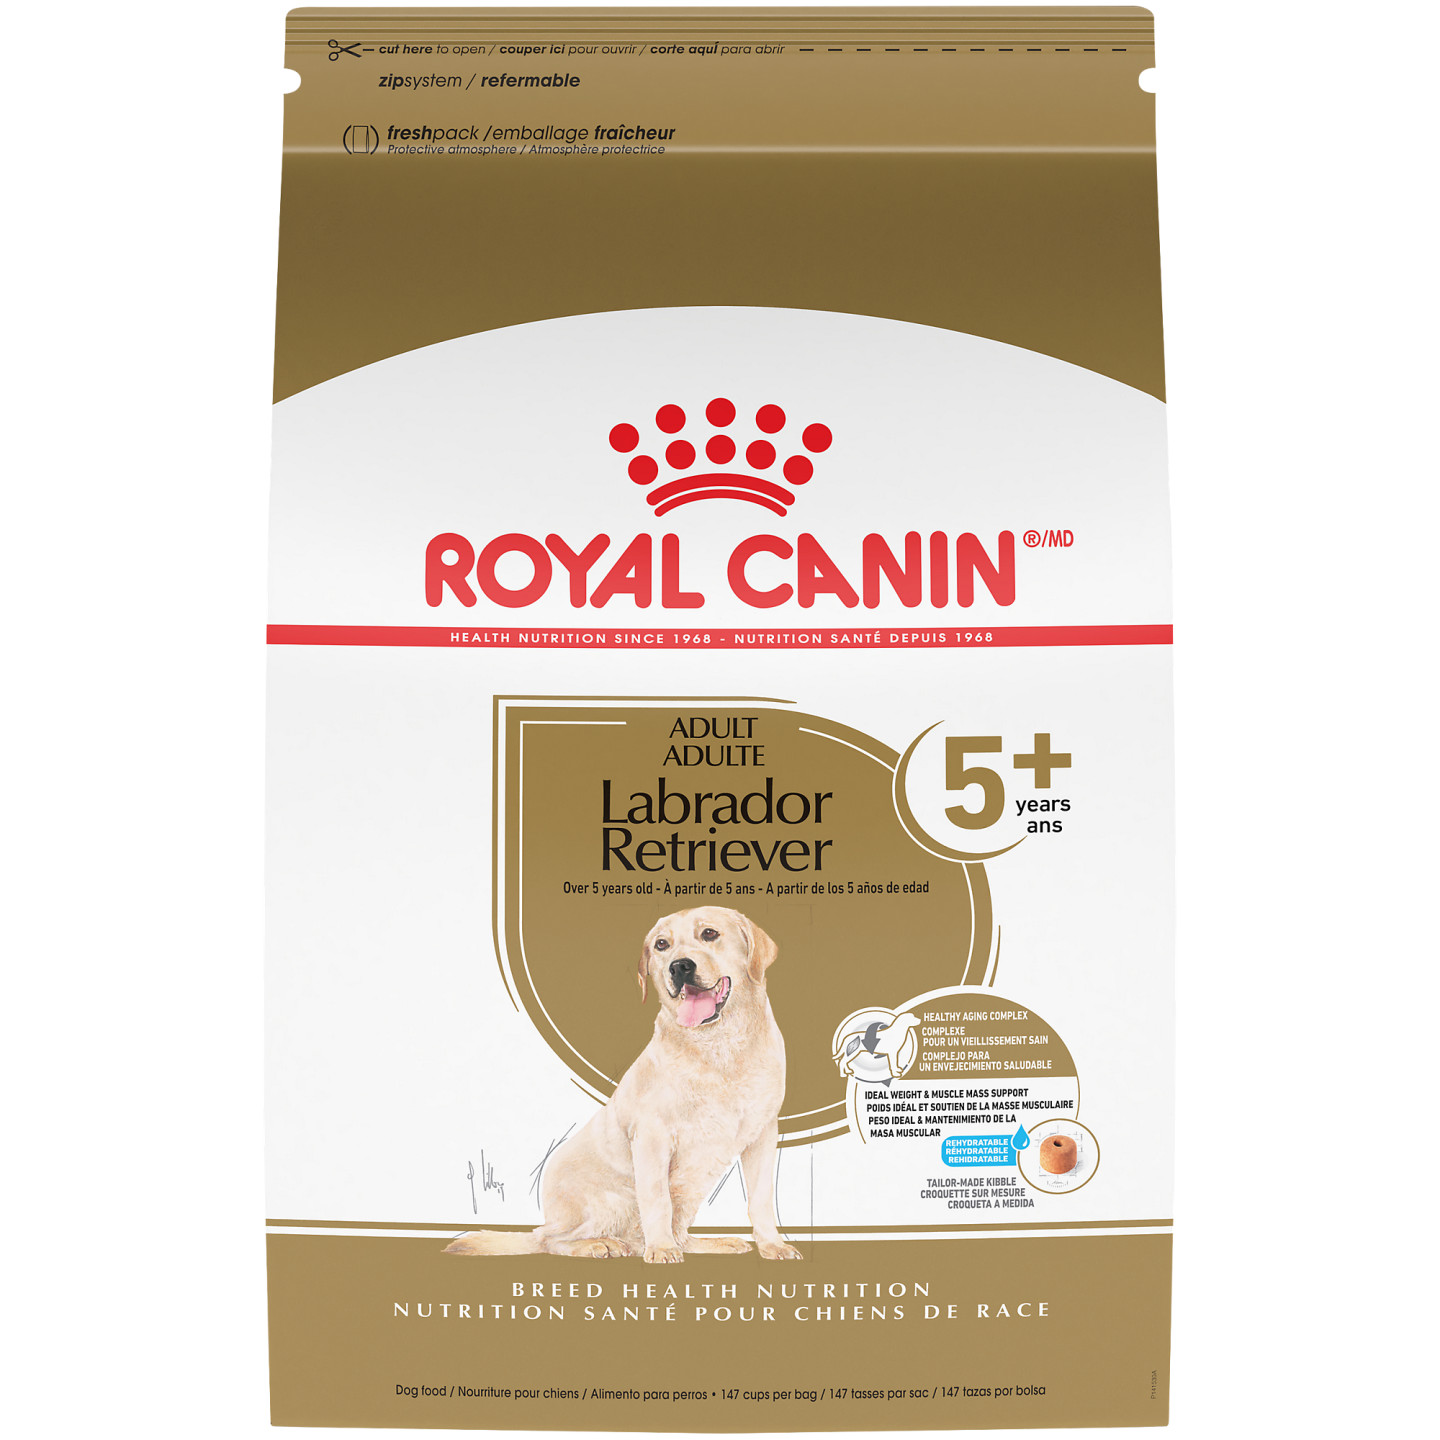 ROYAL CANIN BREED HEALTH NUTRITION Labrador Retriever Puppy dry dog food 30Pound ** Details can